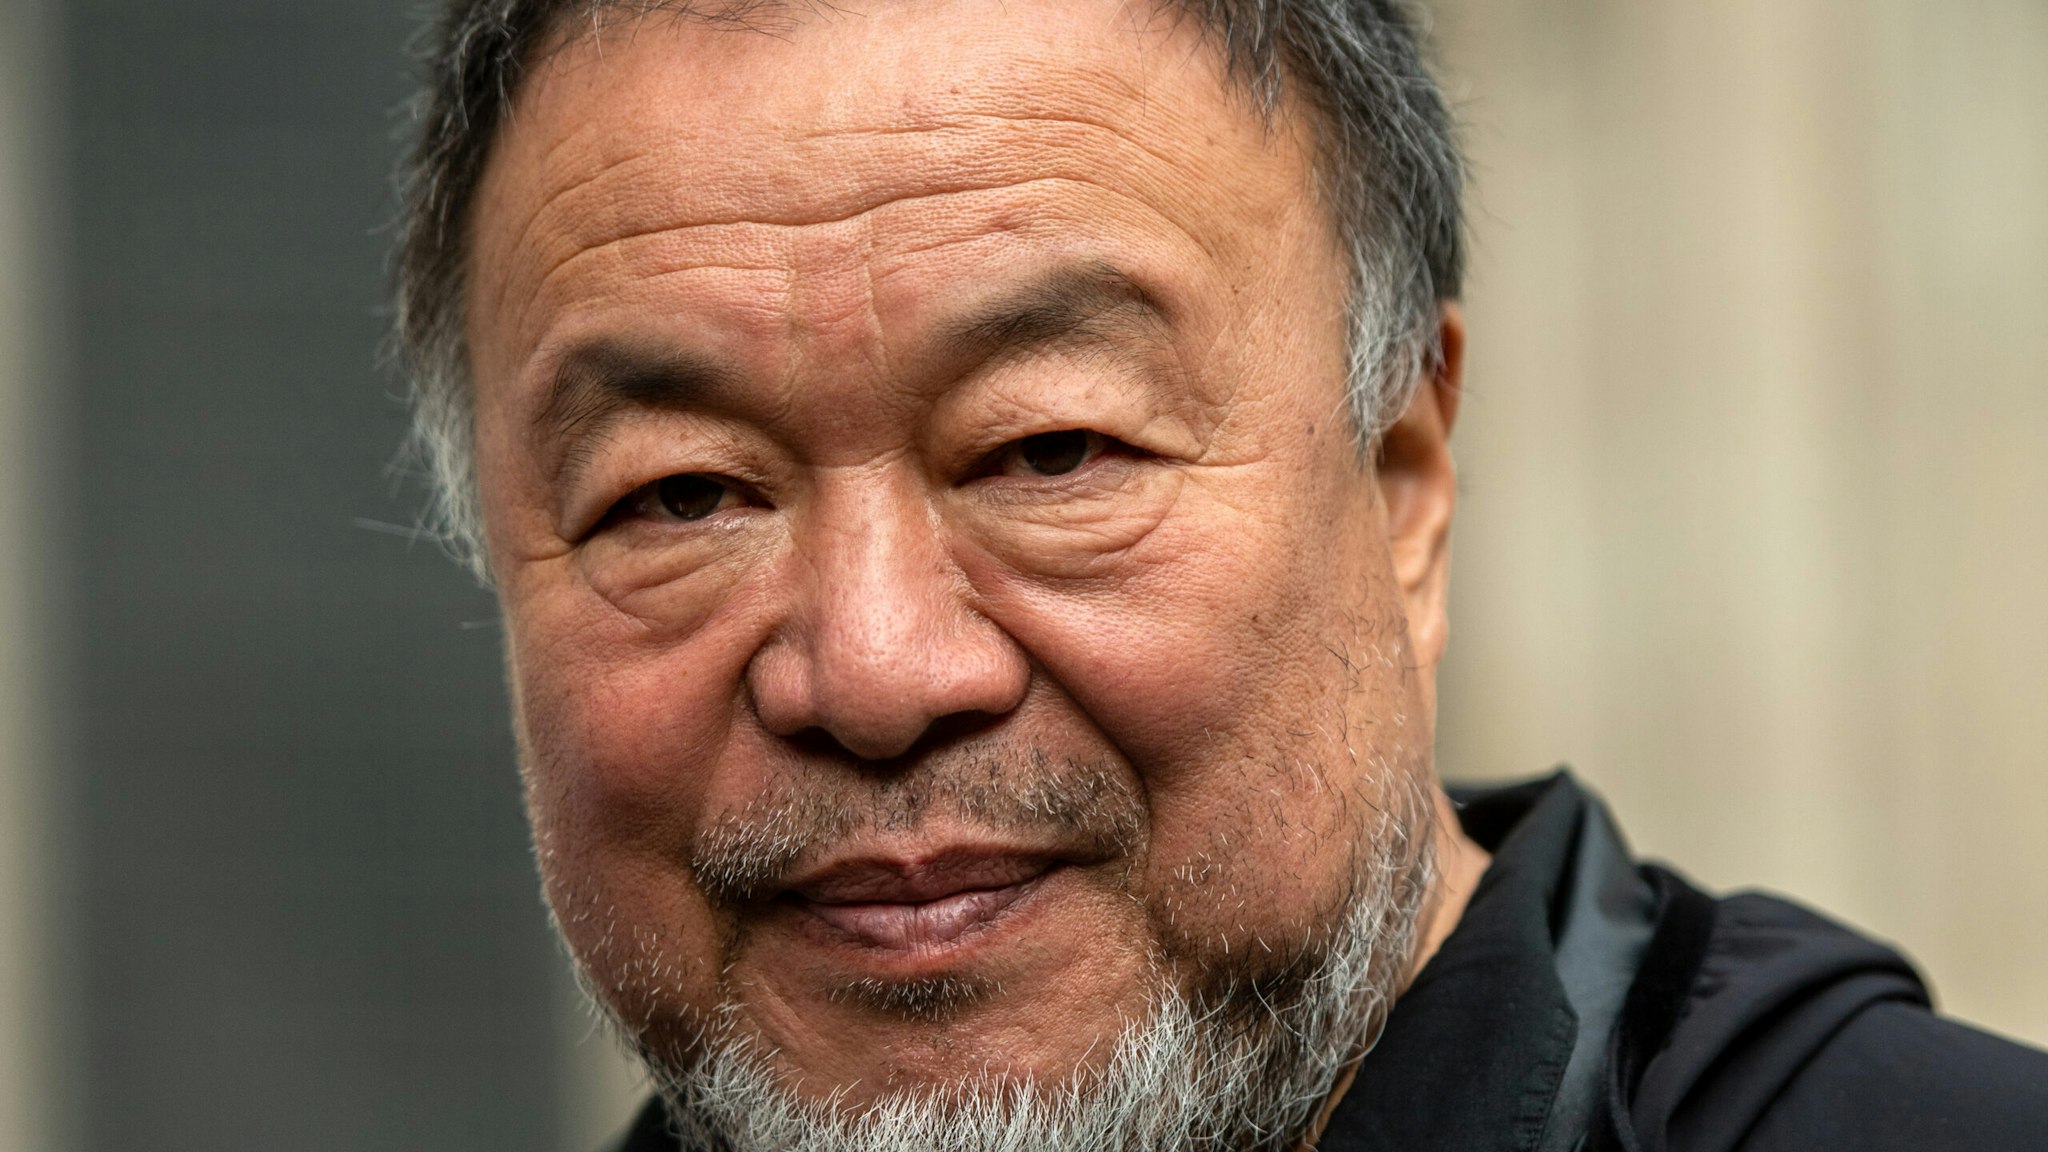 LONDON, ENGLAND - OCTOBER 27: Chinese dissident artist and activist Ai Weiwei is seen outside the Royal Courts of Justice during an appeal hearing for Julian Assanges extradition to the United States on October 27, 2021 in London, England. The United States, which has charged the Wikileaks founder with espionage, had appealed a January ruling that Assange should not be extradited to the US due to concerns over his mental health and the risk of suicide in a US prison.